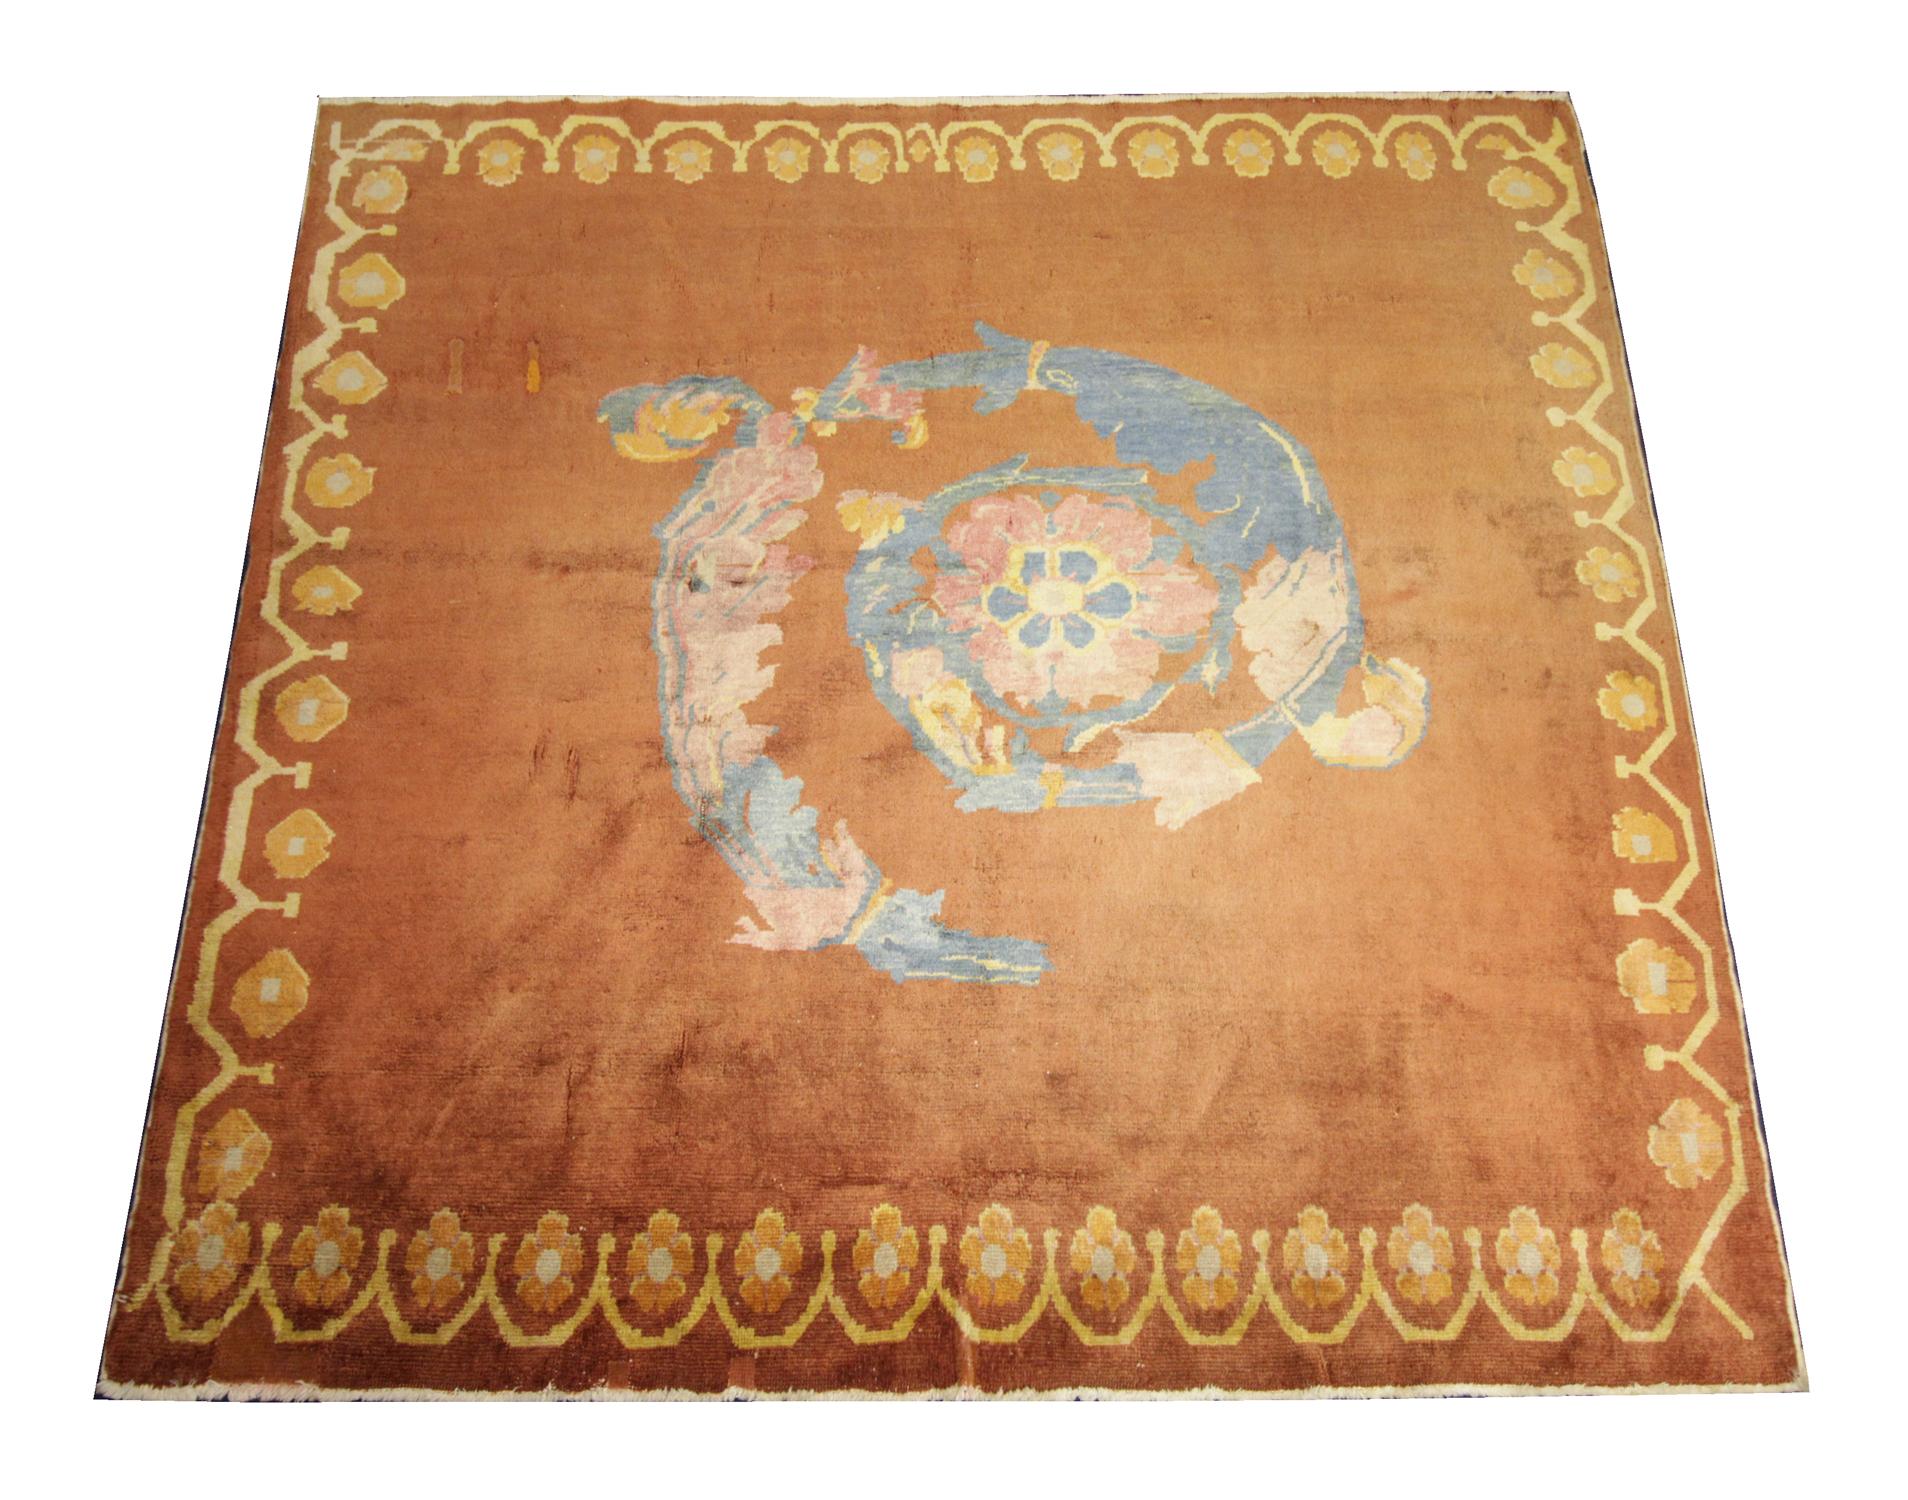 This fine wool rug was woven by hand in the 1930s in China. The central design features an abstract swirl pattern made up of blue, pink and orange accent colours that contrast elegantly with the orange background. This has then been framed by a